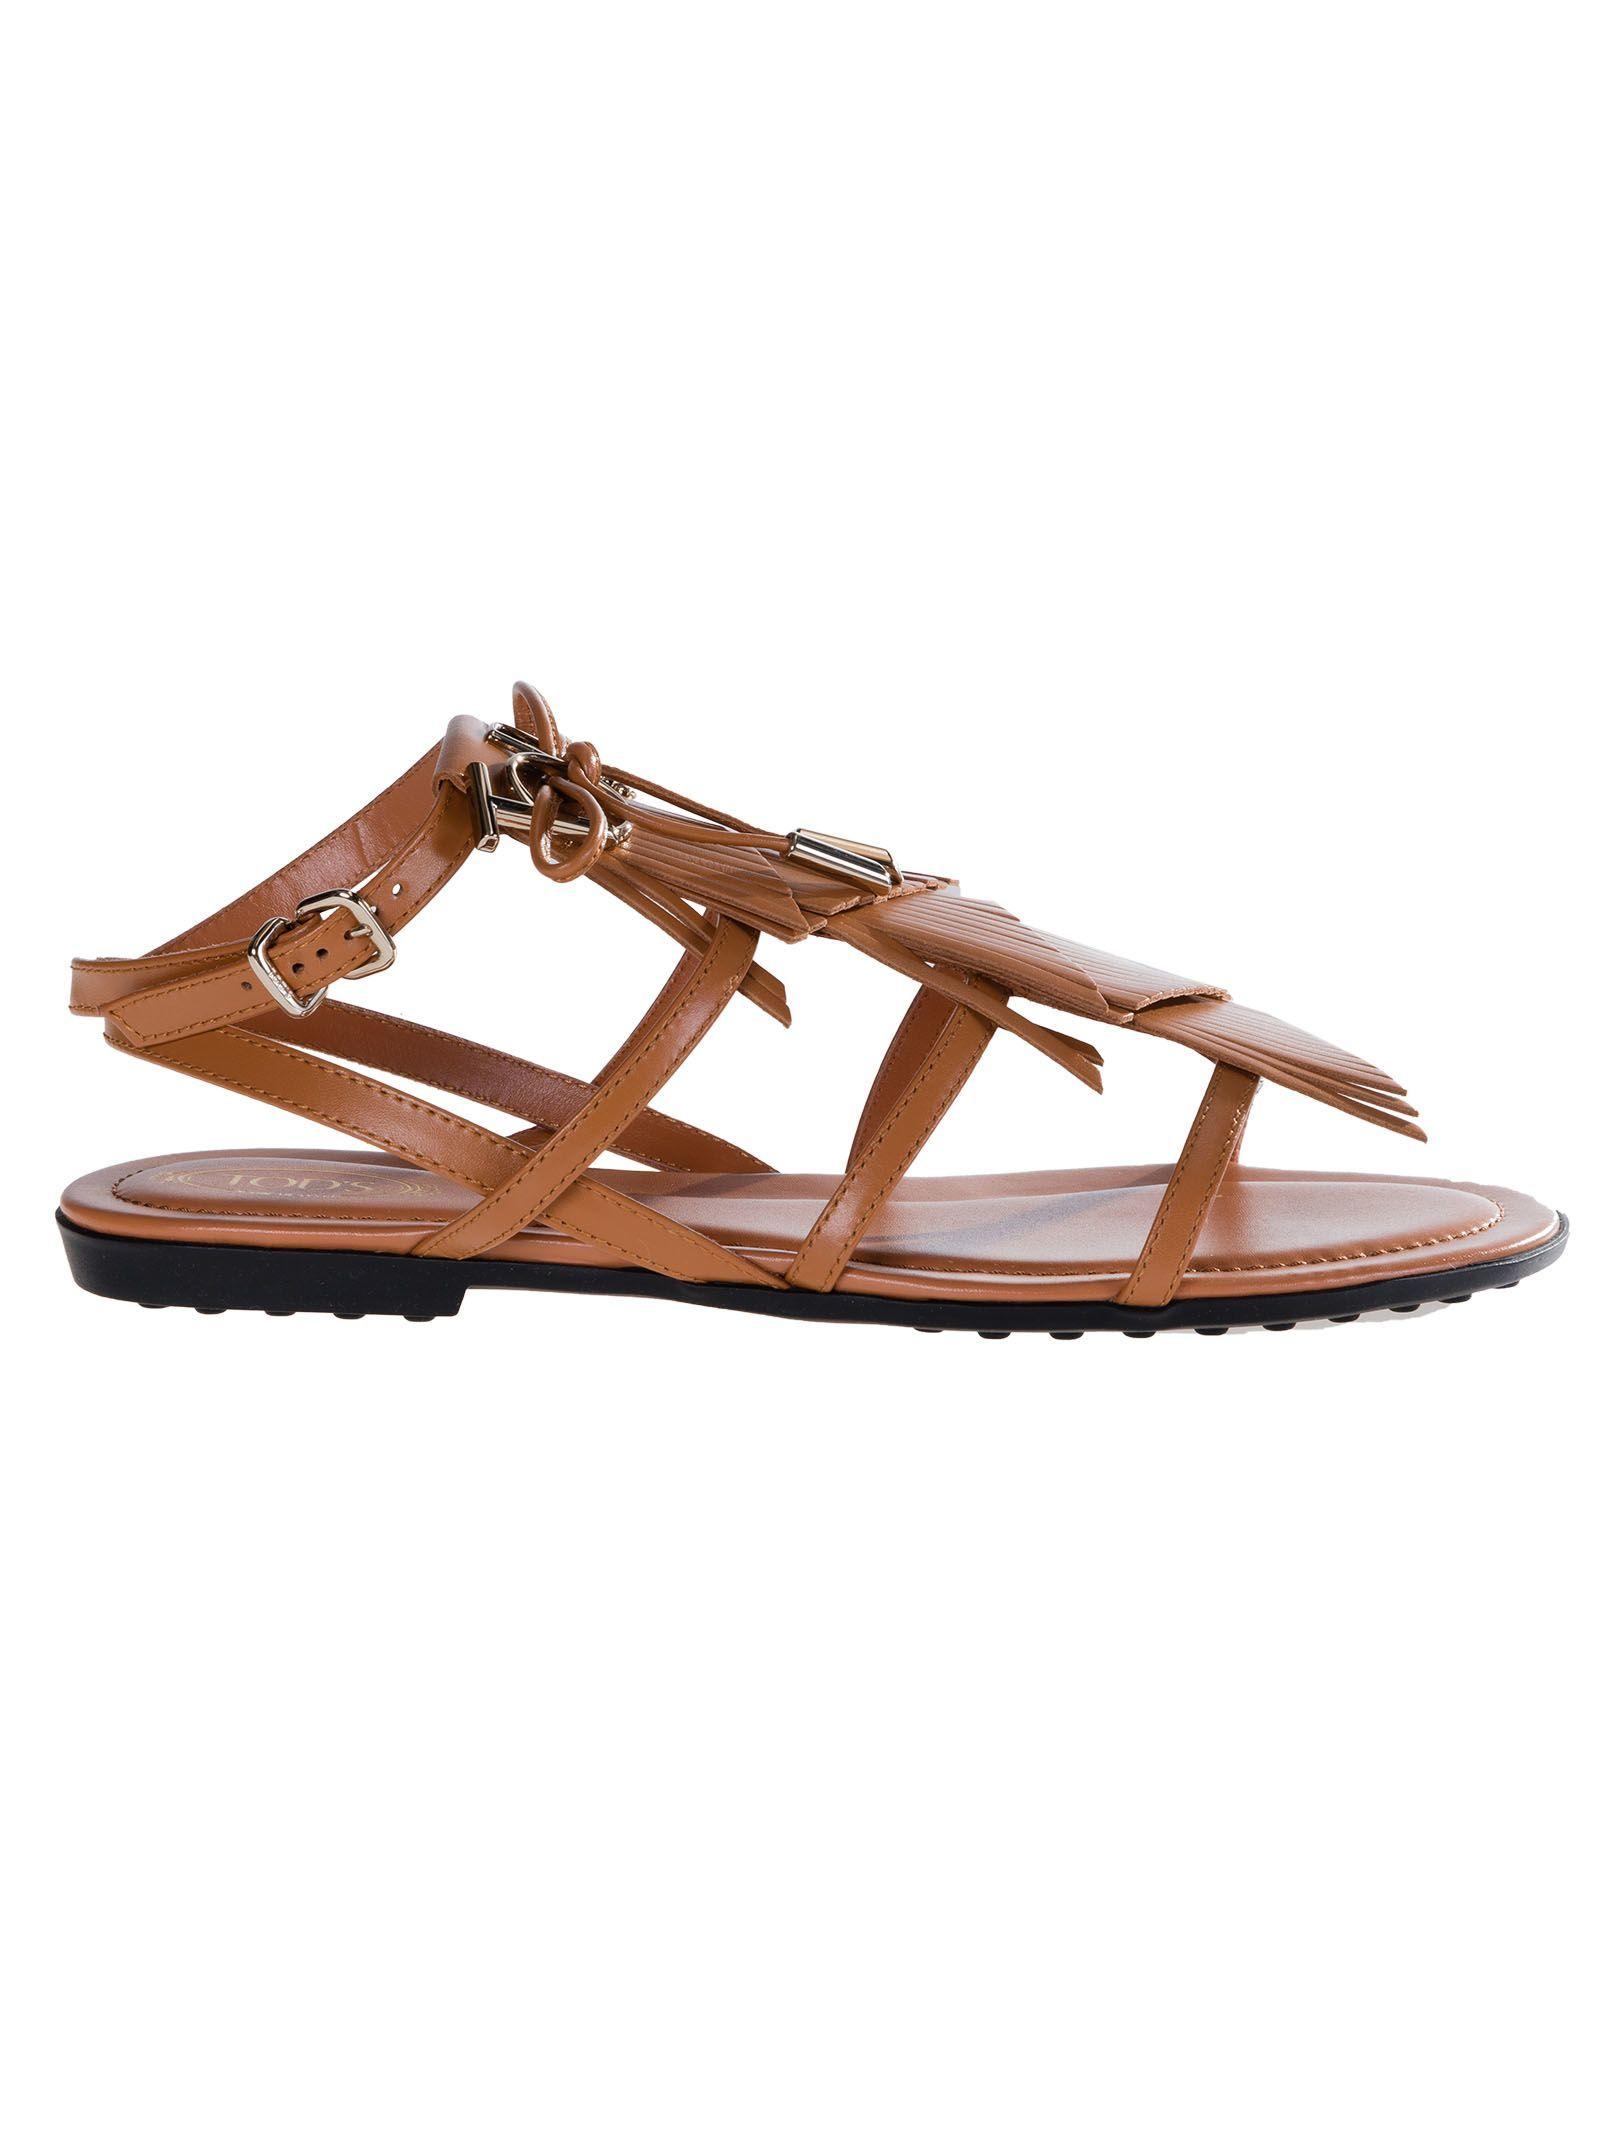 Tod's Logo - TOD'S | Tod's Tod's Logo Fringe Flat Sandals #Shoes #Sandals #TOD'S ...